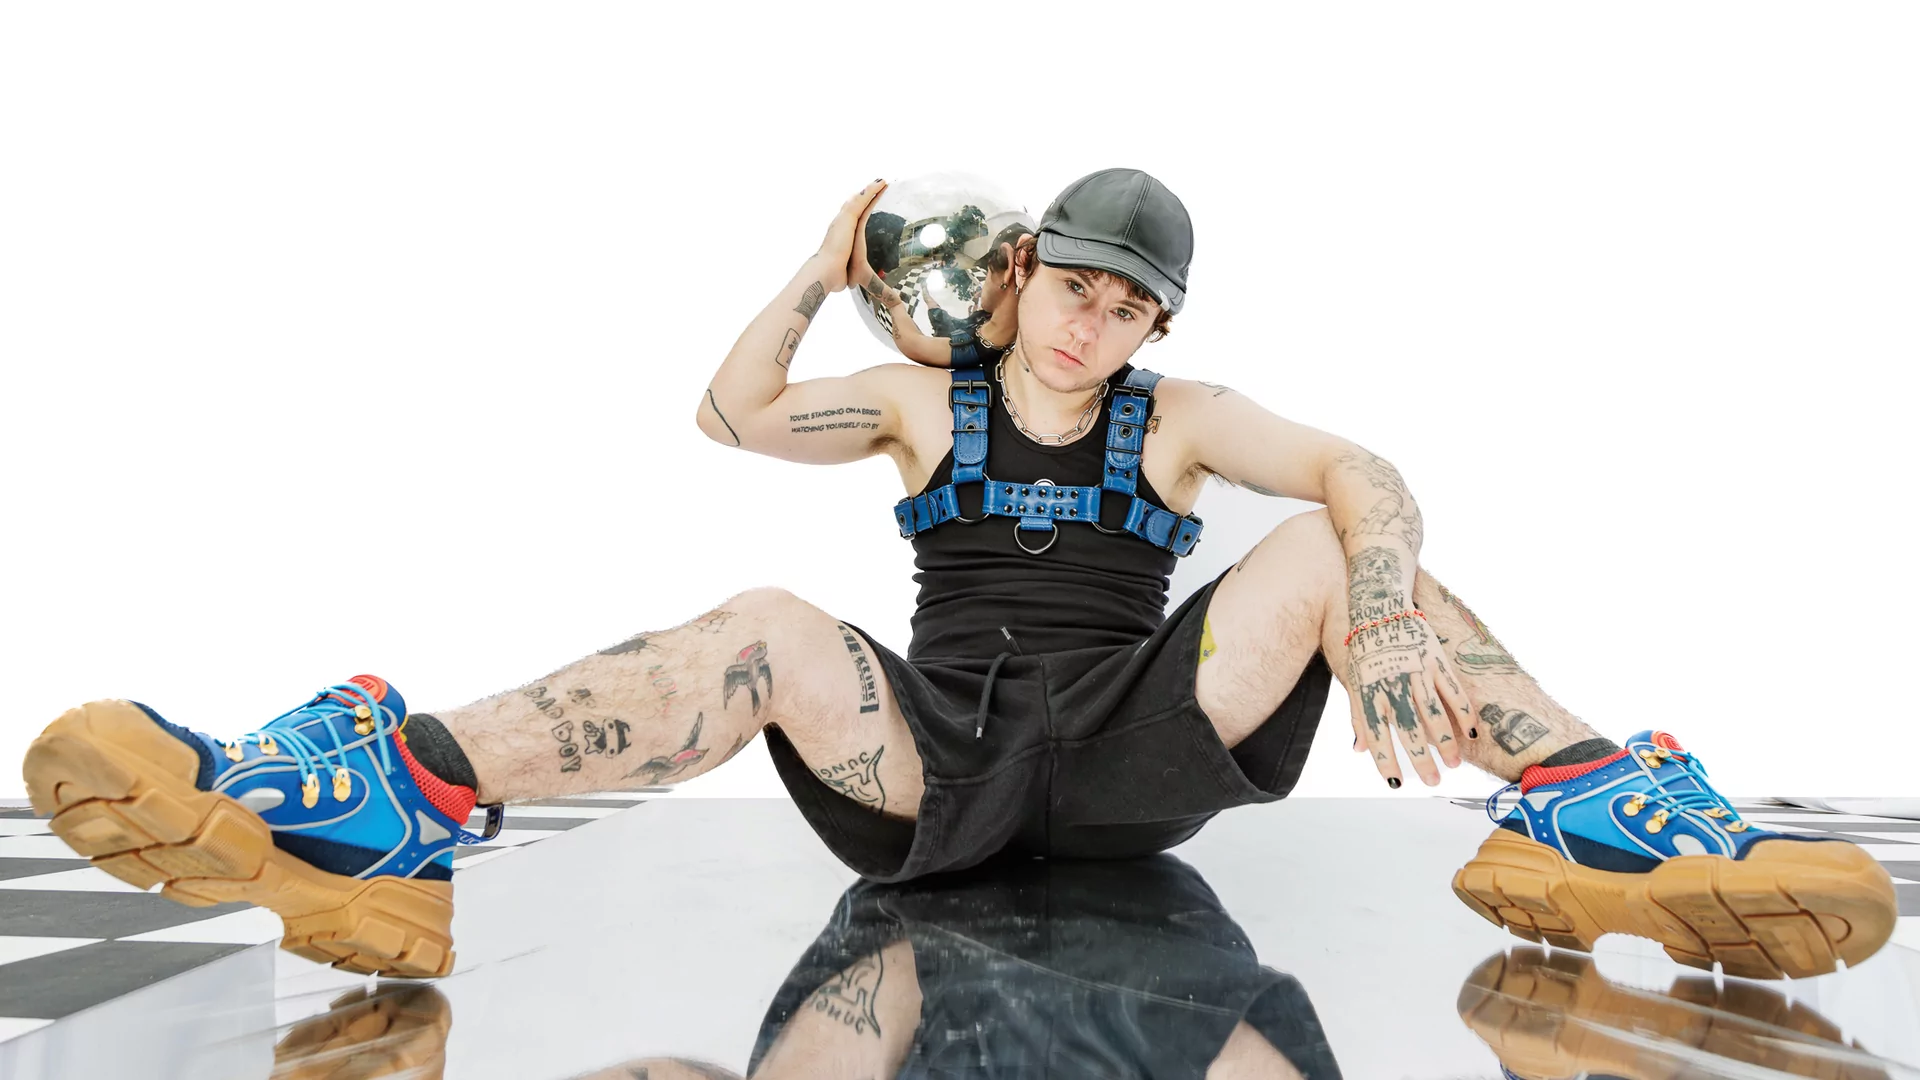 Photo of a.k.a. skips sitting on the floor wearing a blue harness and holding a silver sphere